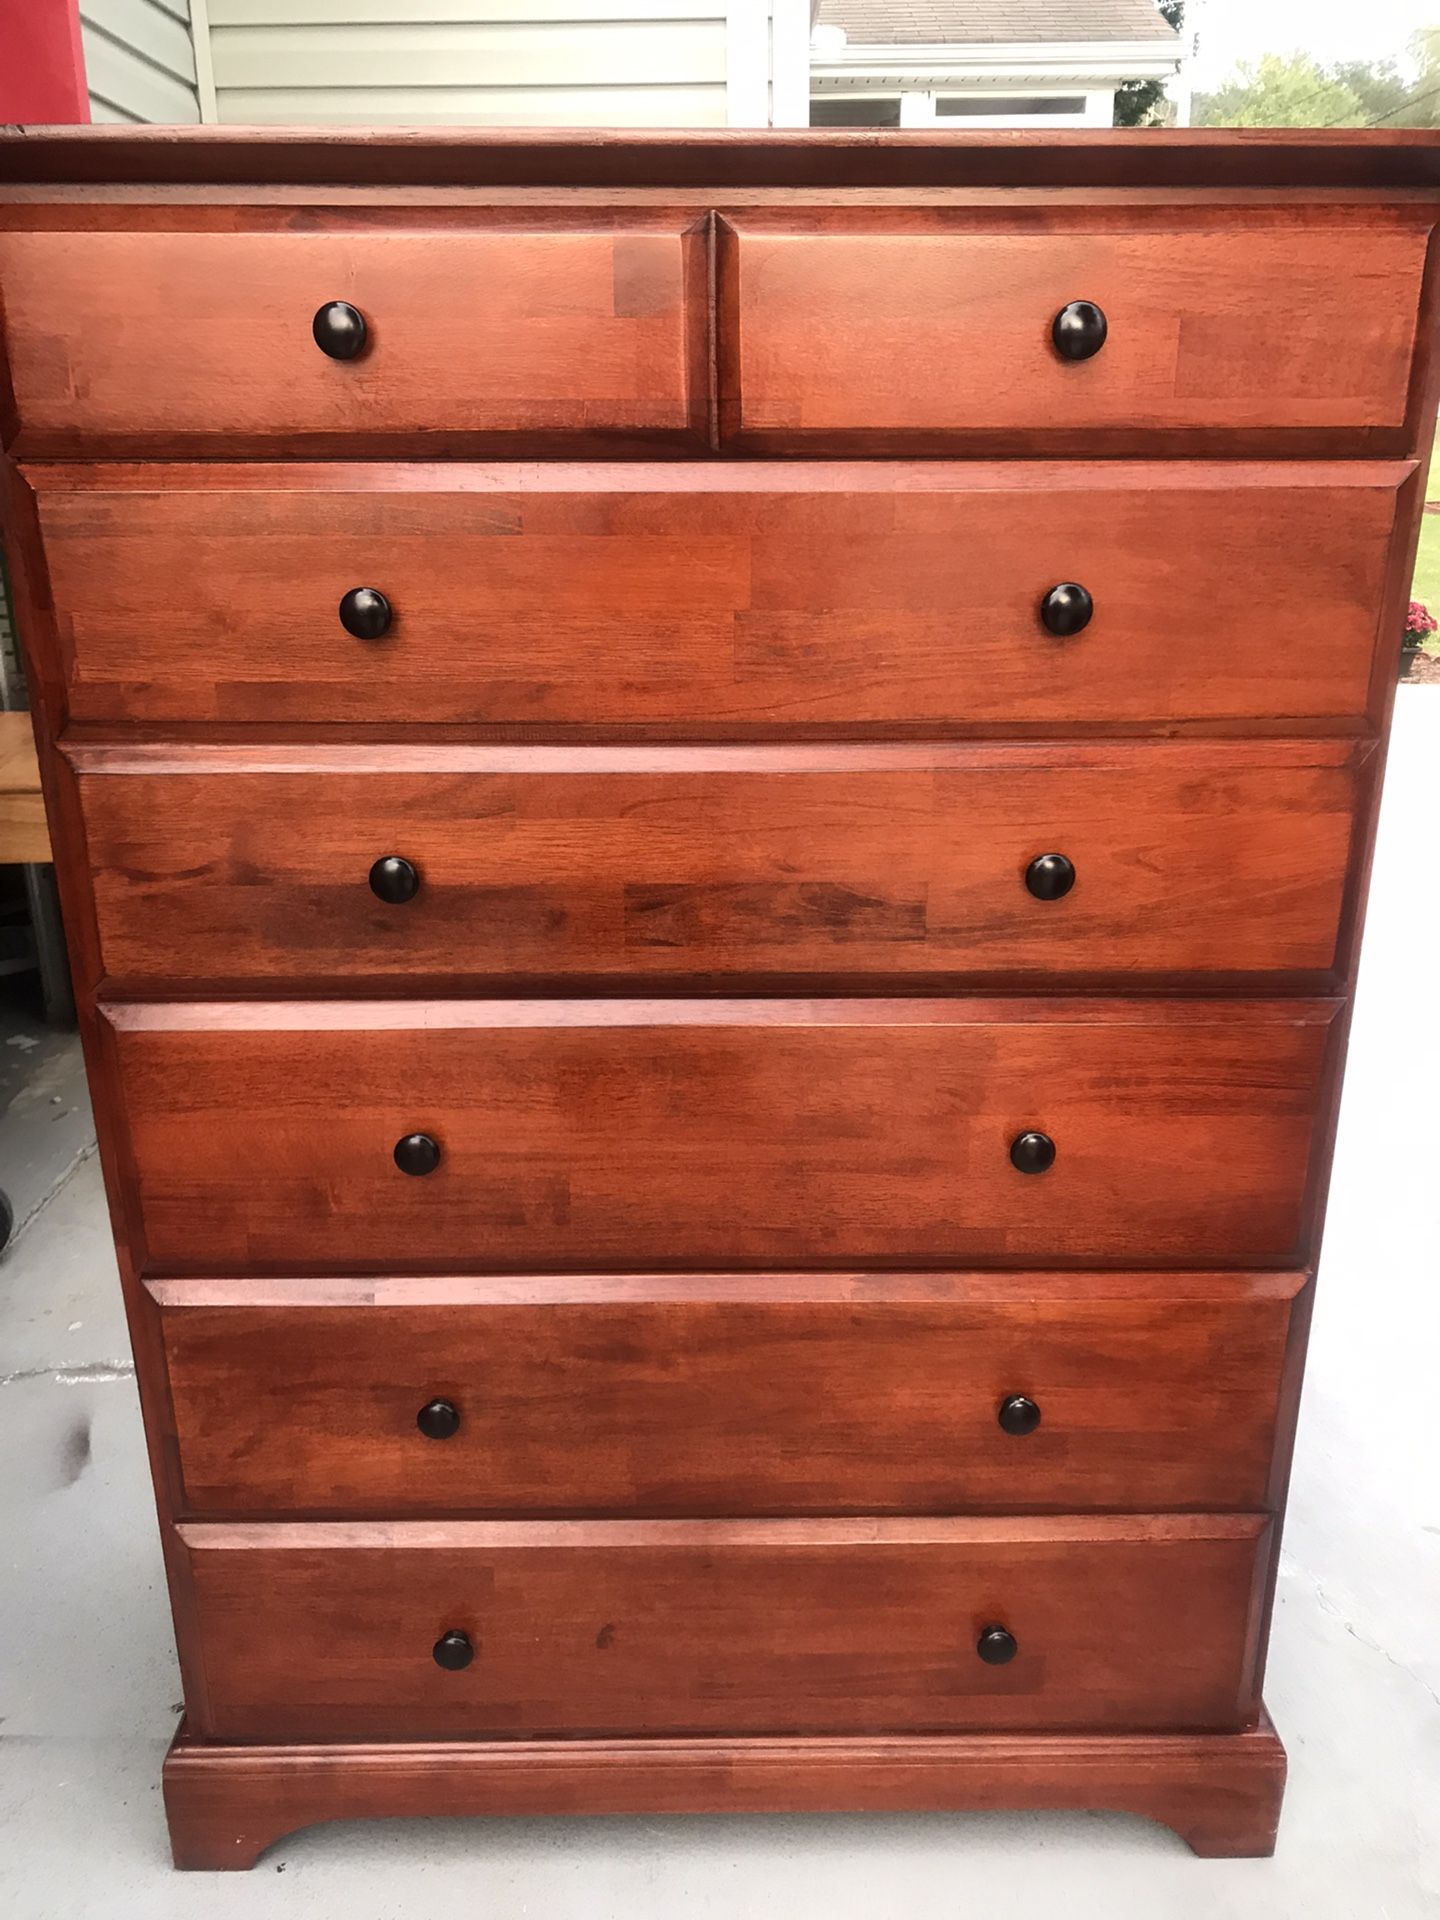 Very Nice Chest Drawer  Very Good Shape  Nothing Broken 